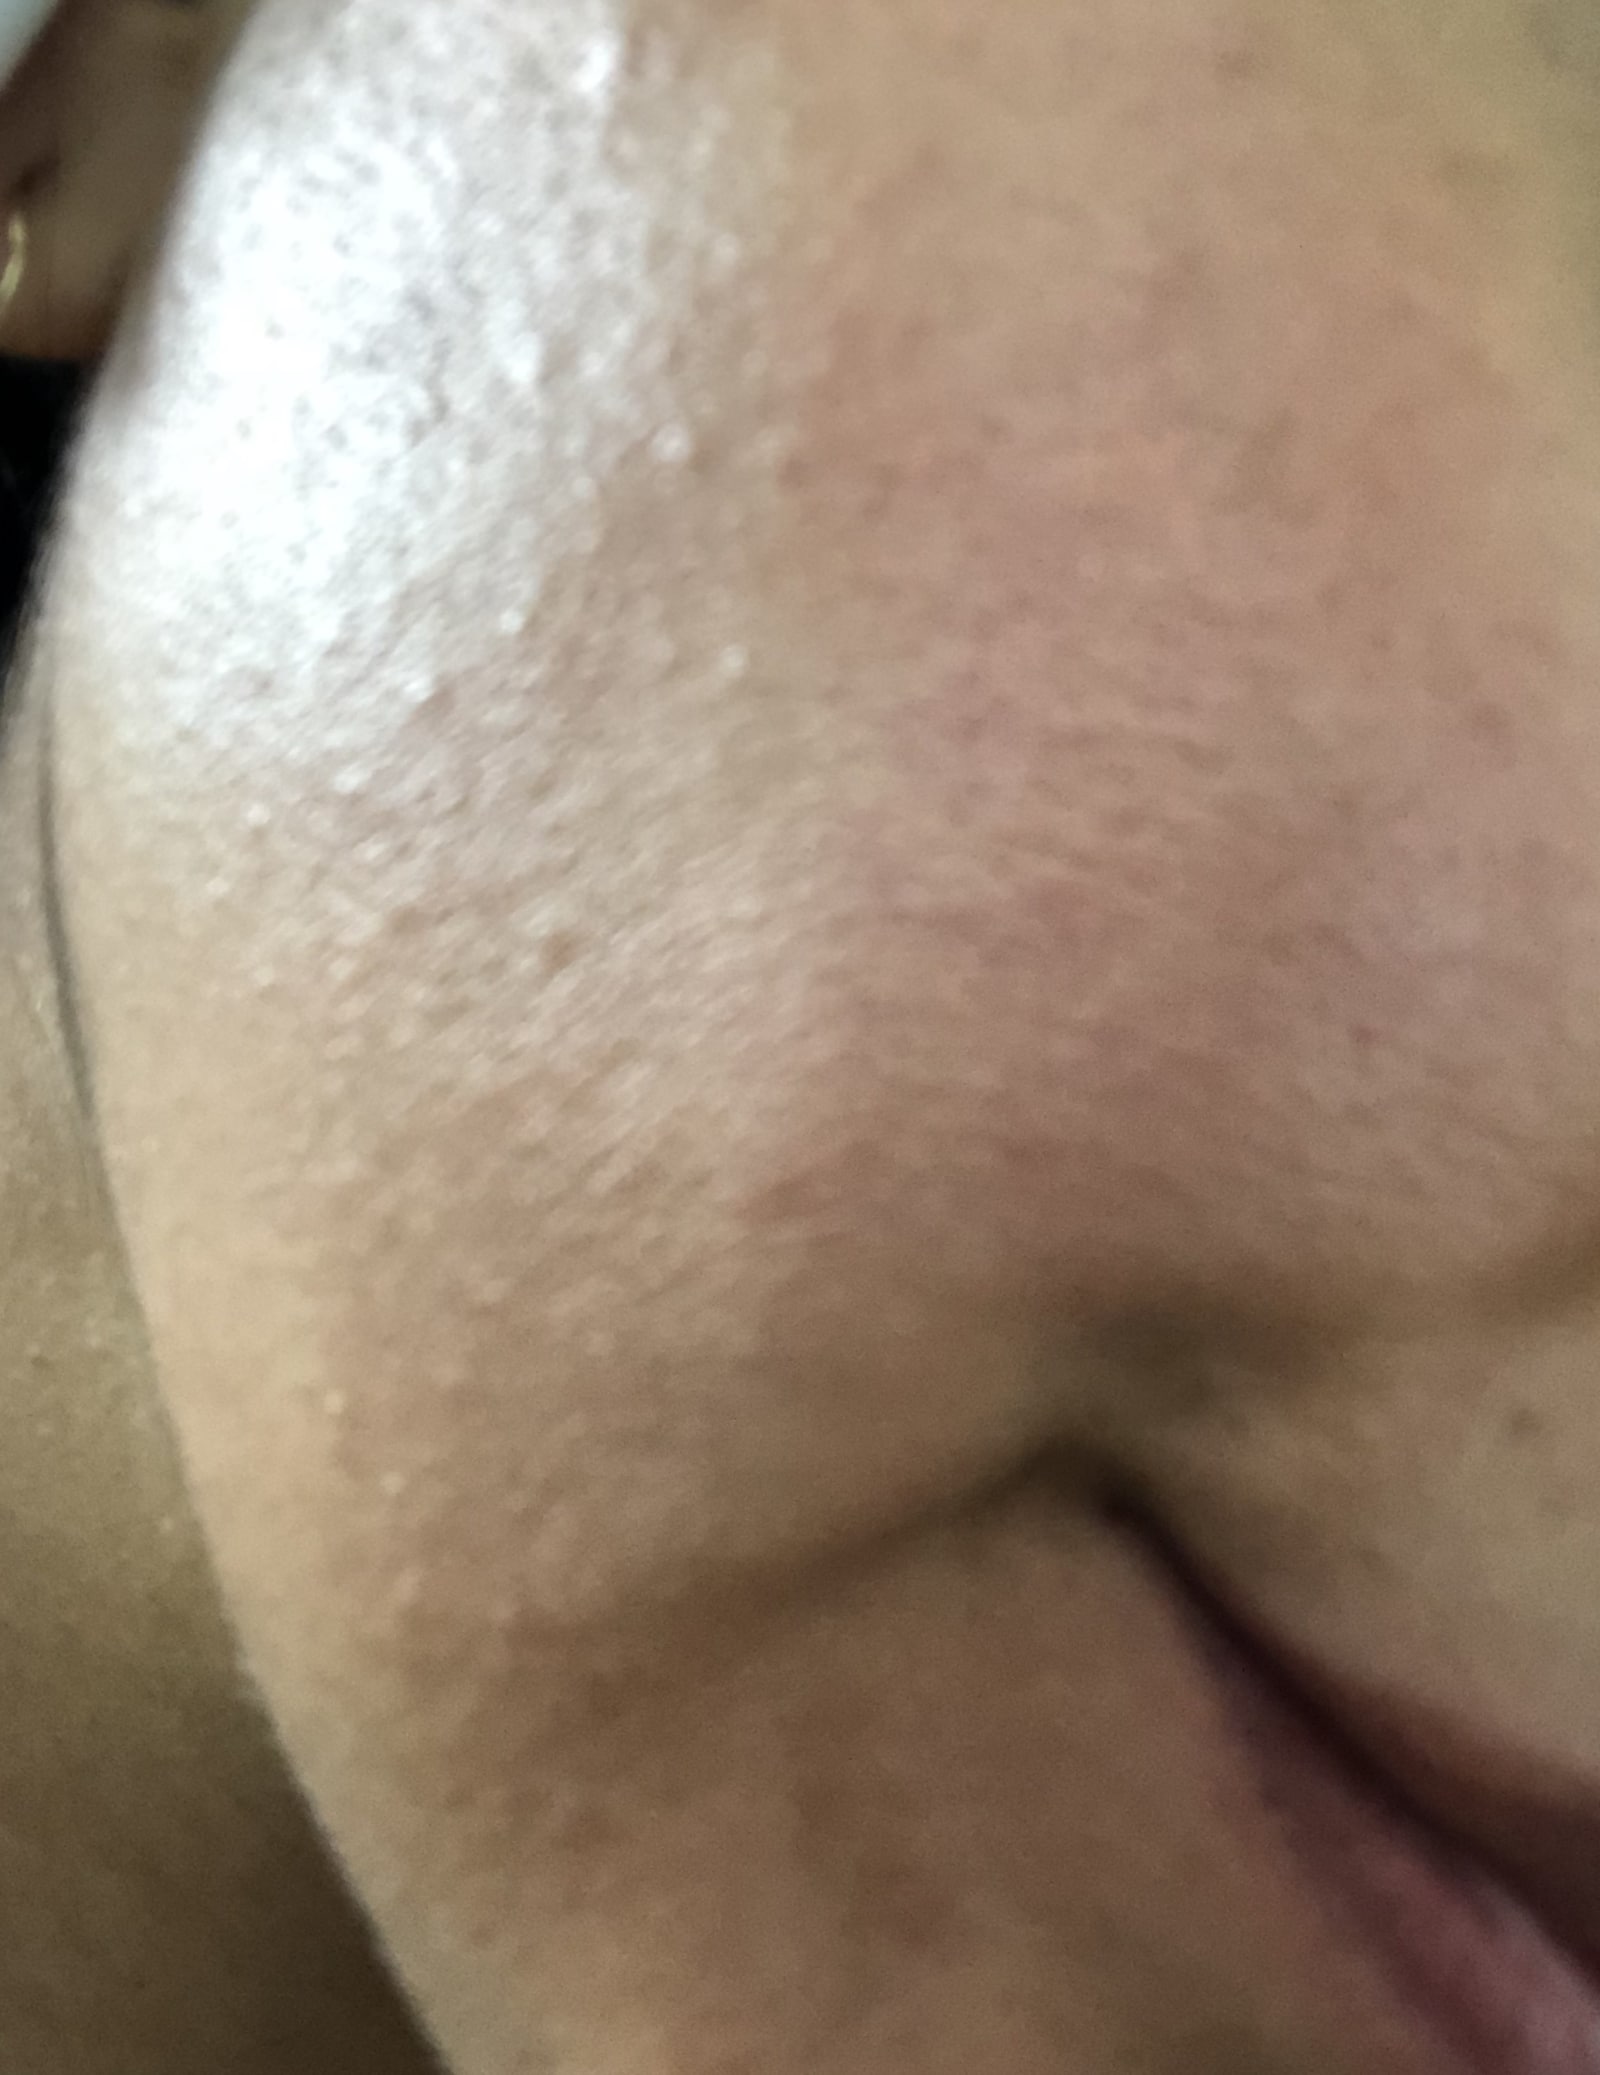 Example of bumpy skin from dehydration